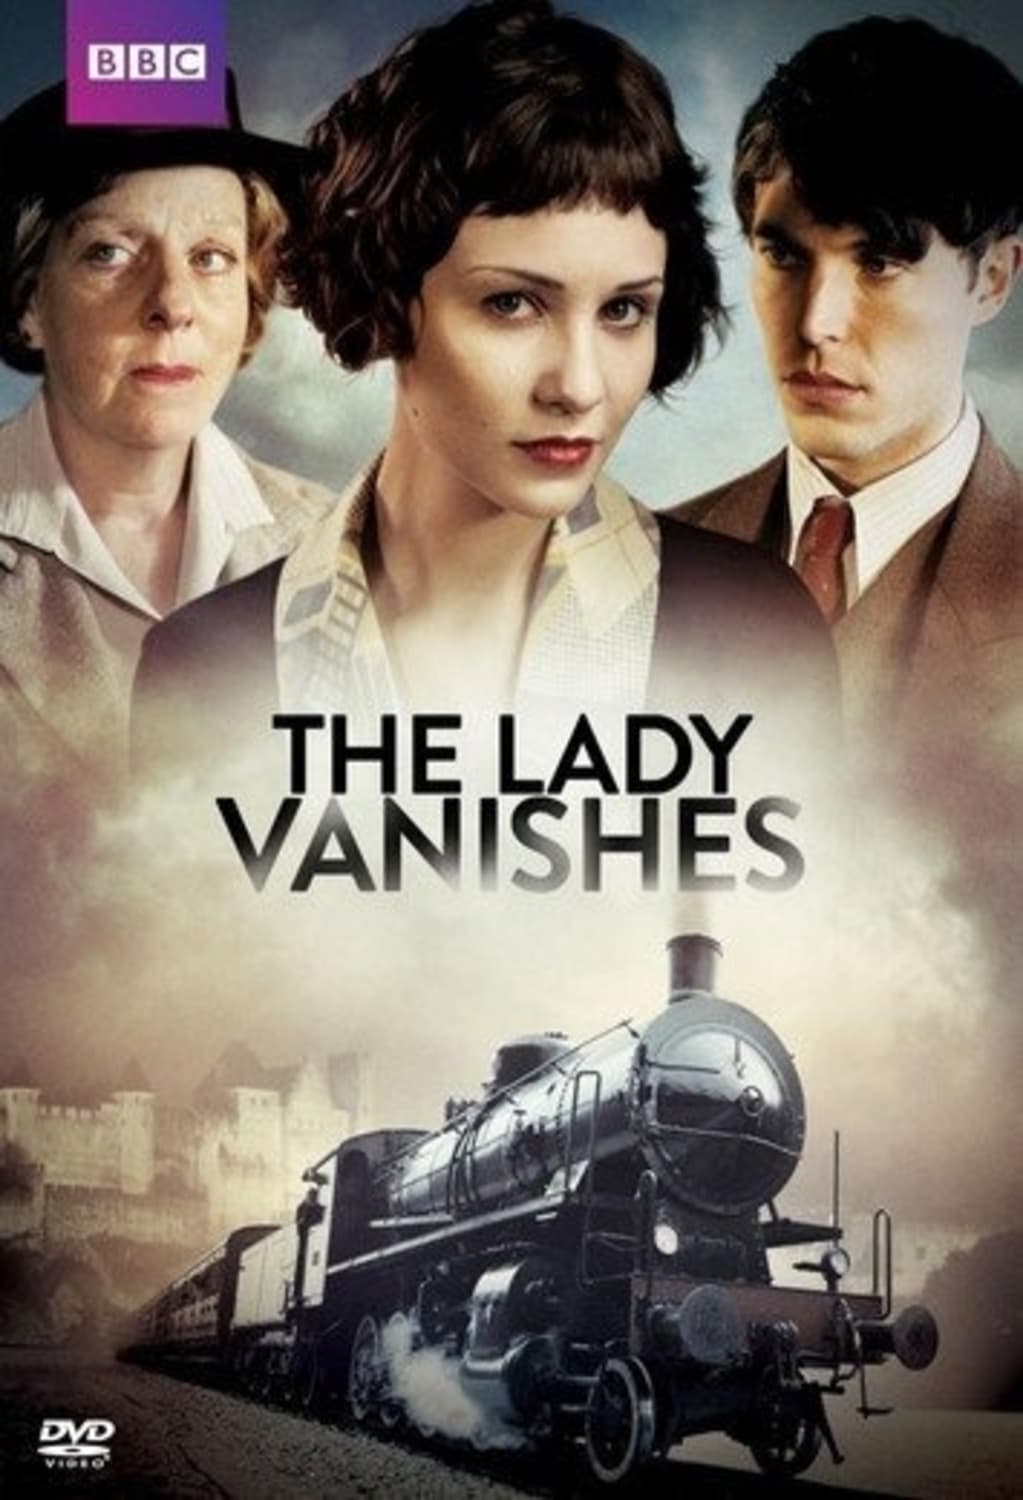 The Lady Vanishes (DVD) on MovieShack